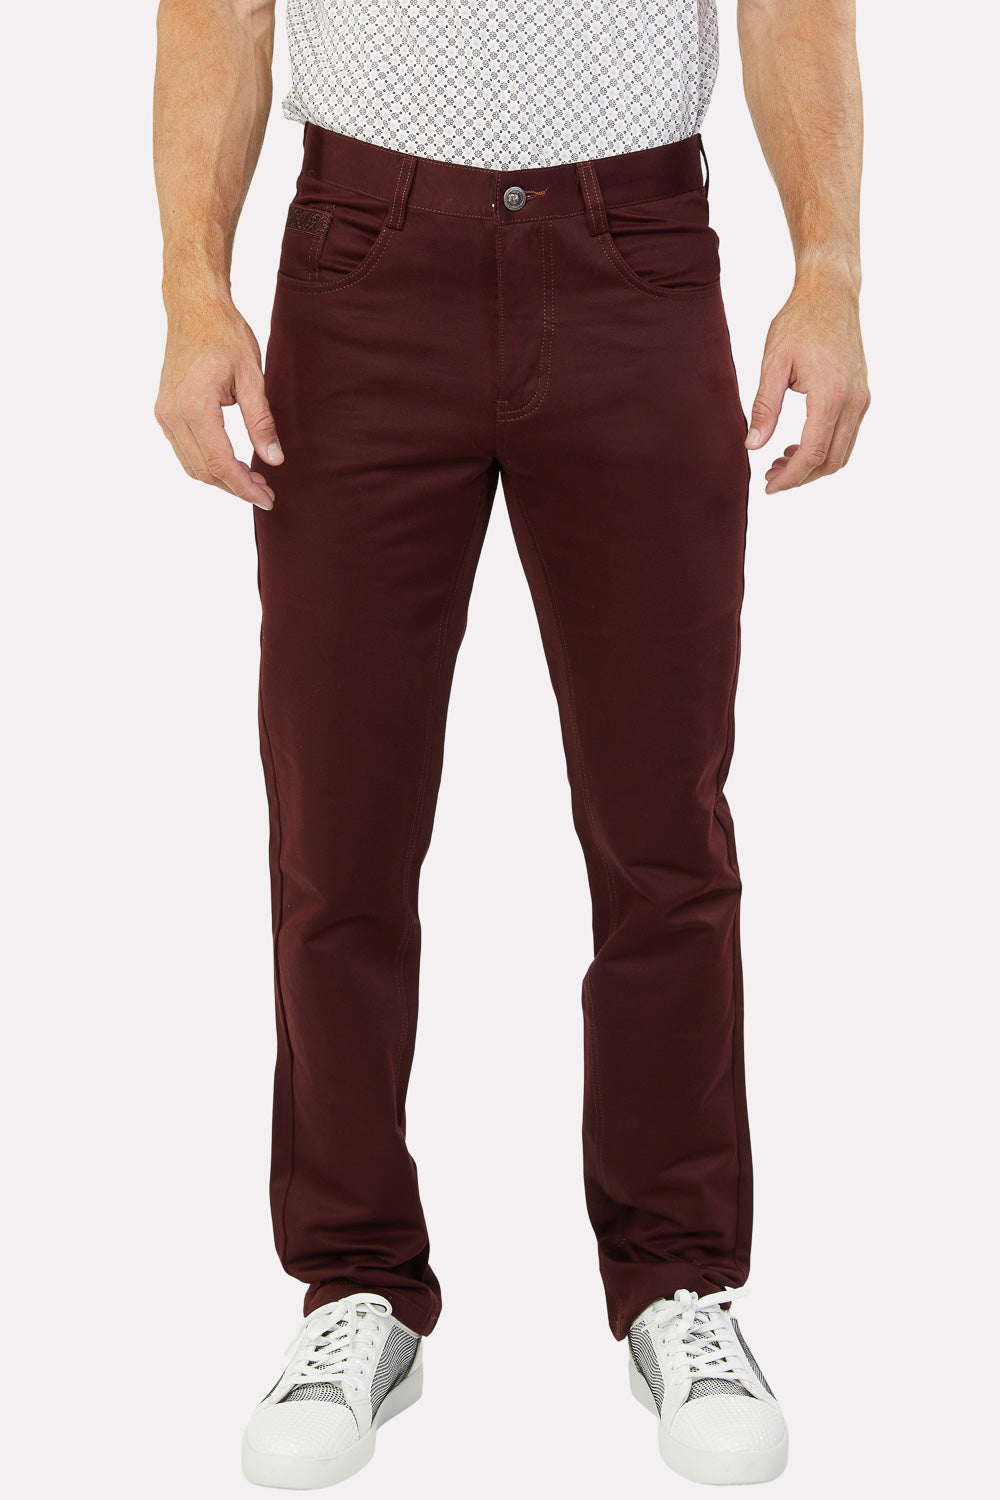 Slade Men's Wine Relaxed Fit Stretch Pants